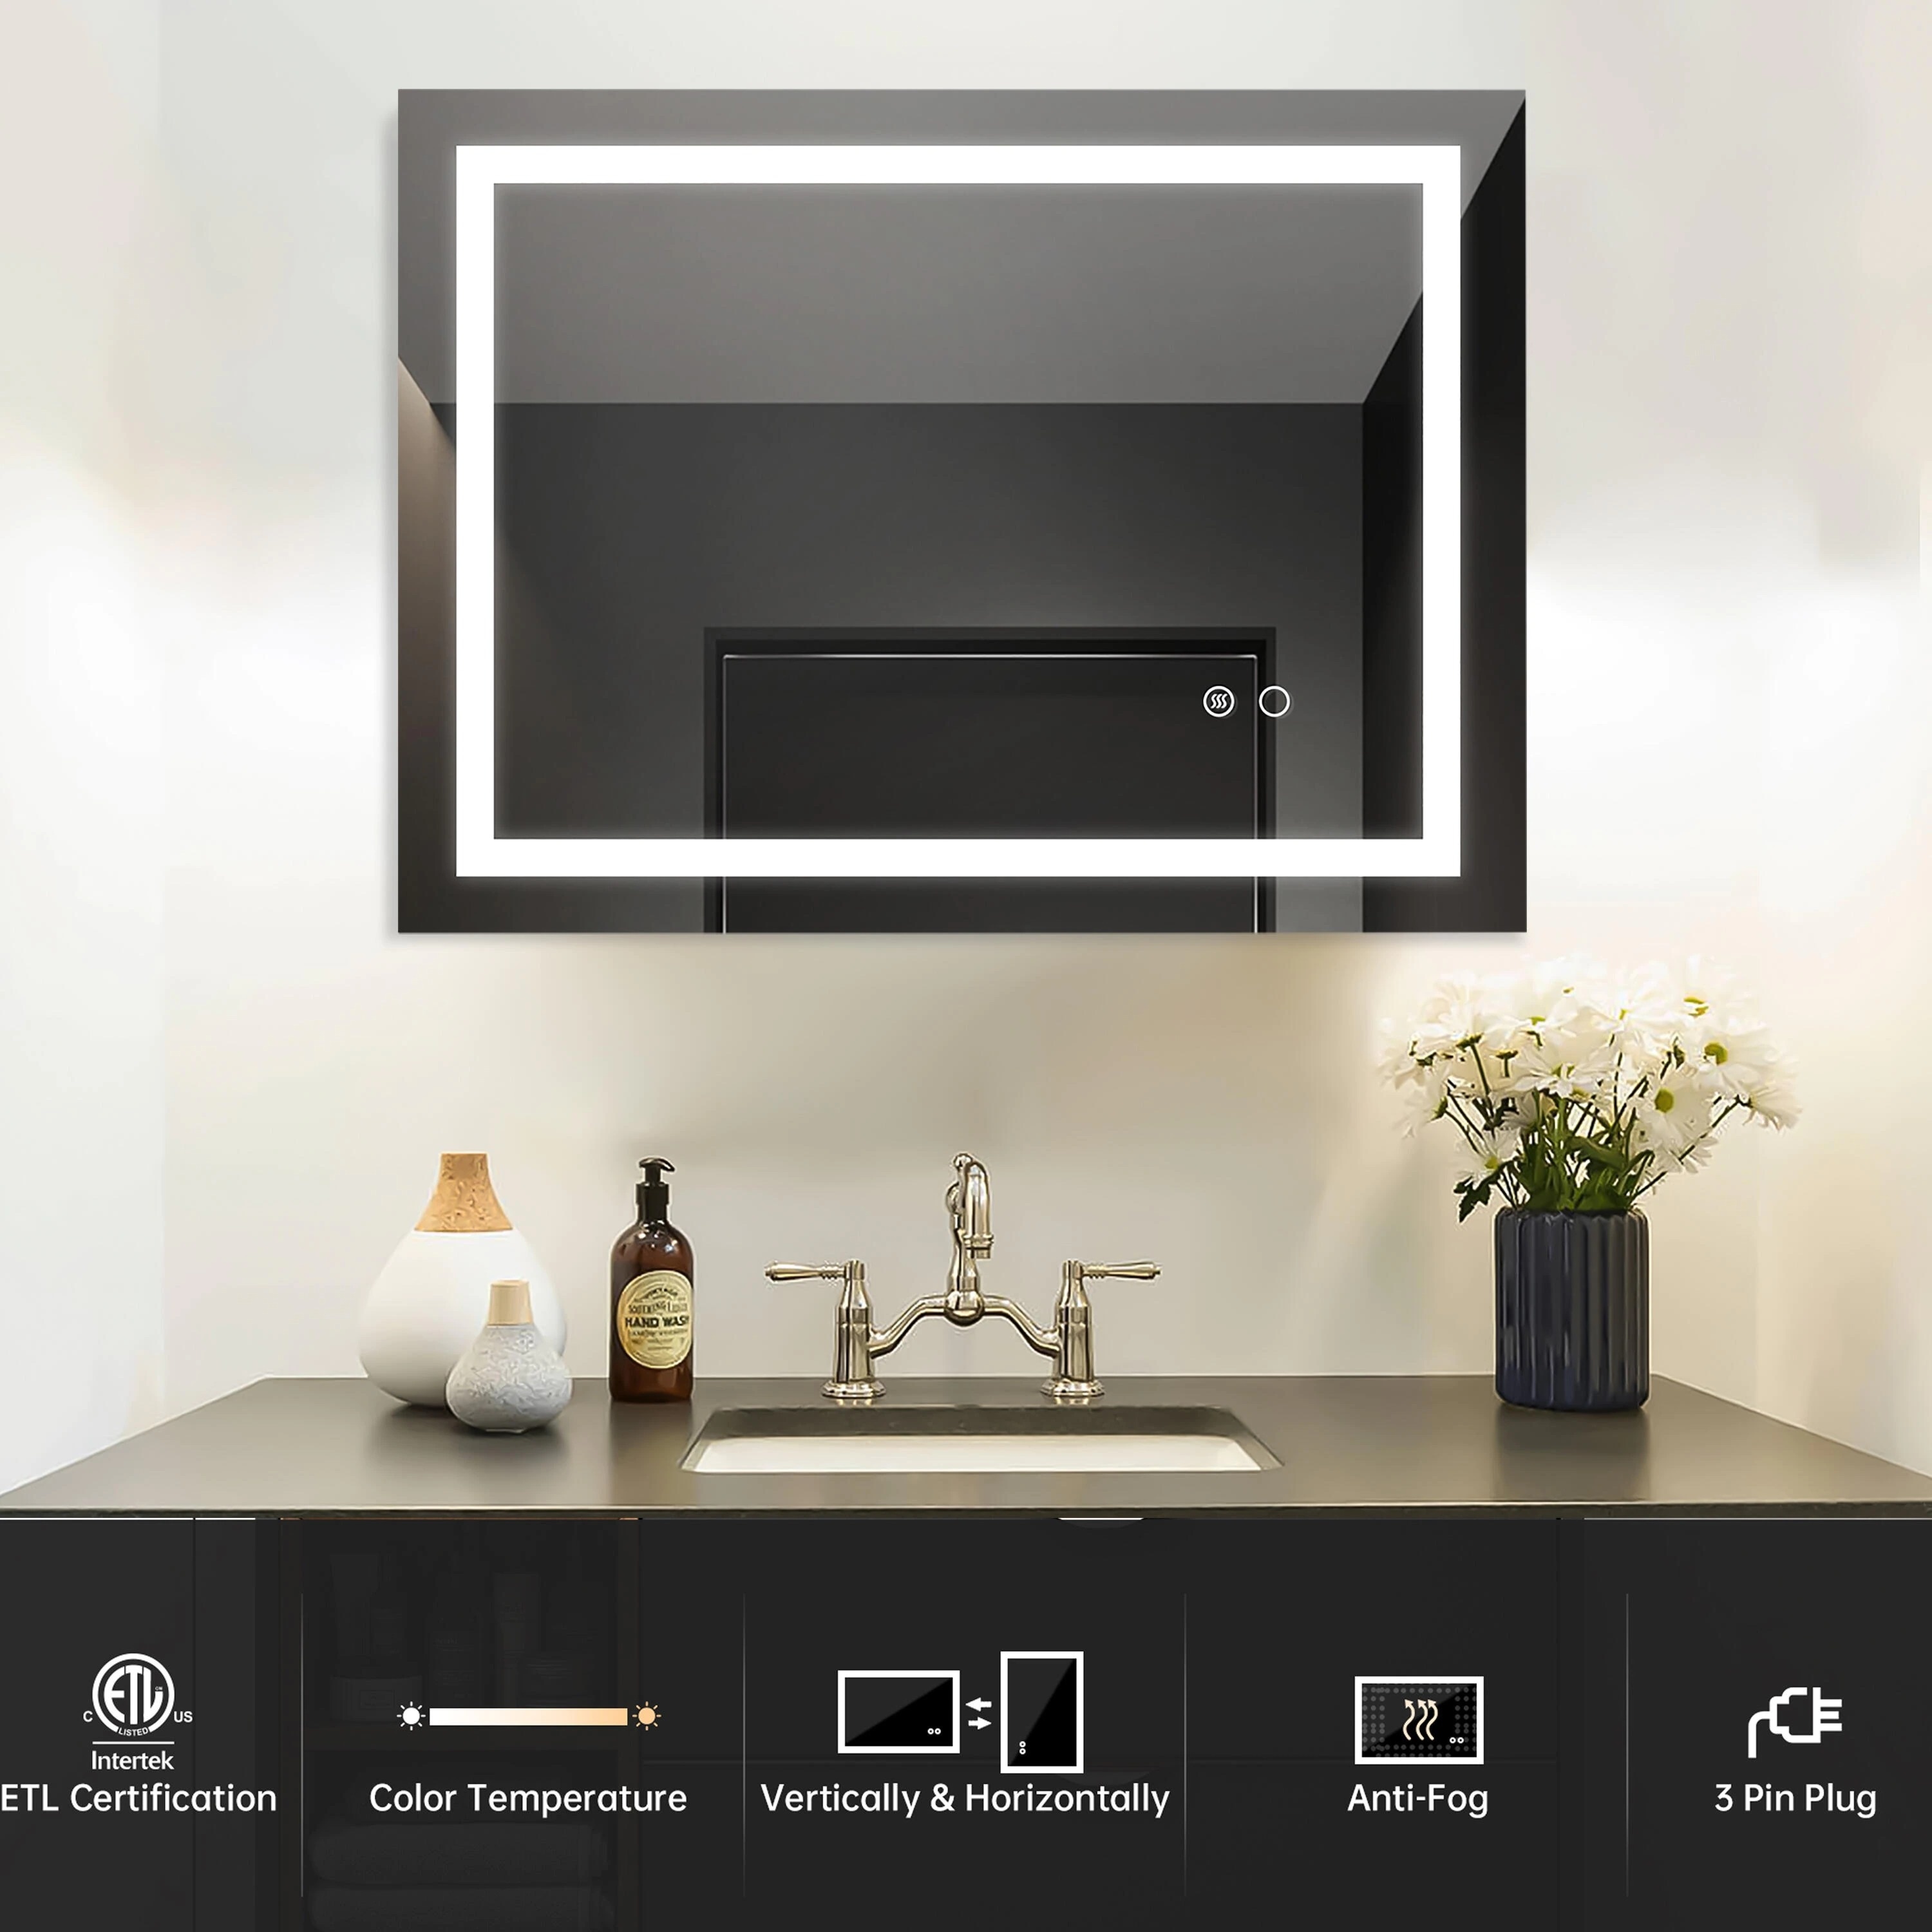 32 in. W x 24 in. H Rectangular Frameless Anti-Fog LED Light Wall Mounted Bathroom  Vanity Mirror with Touch Button On Sale Bed Bath  Beyond 34863976